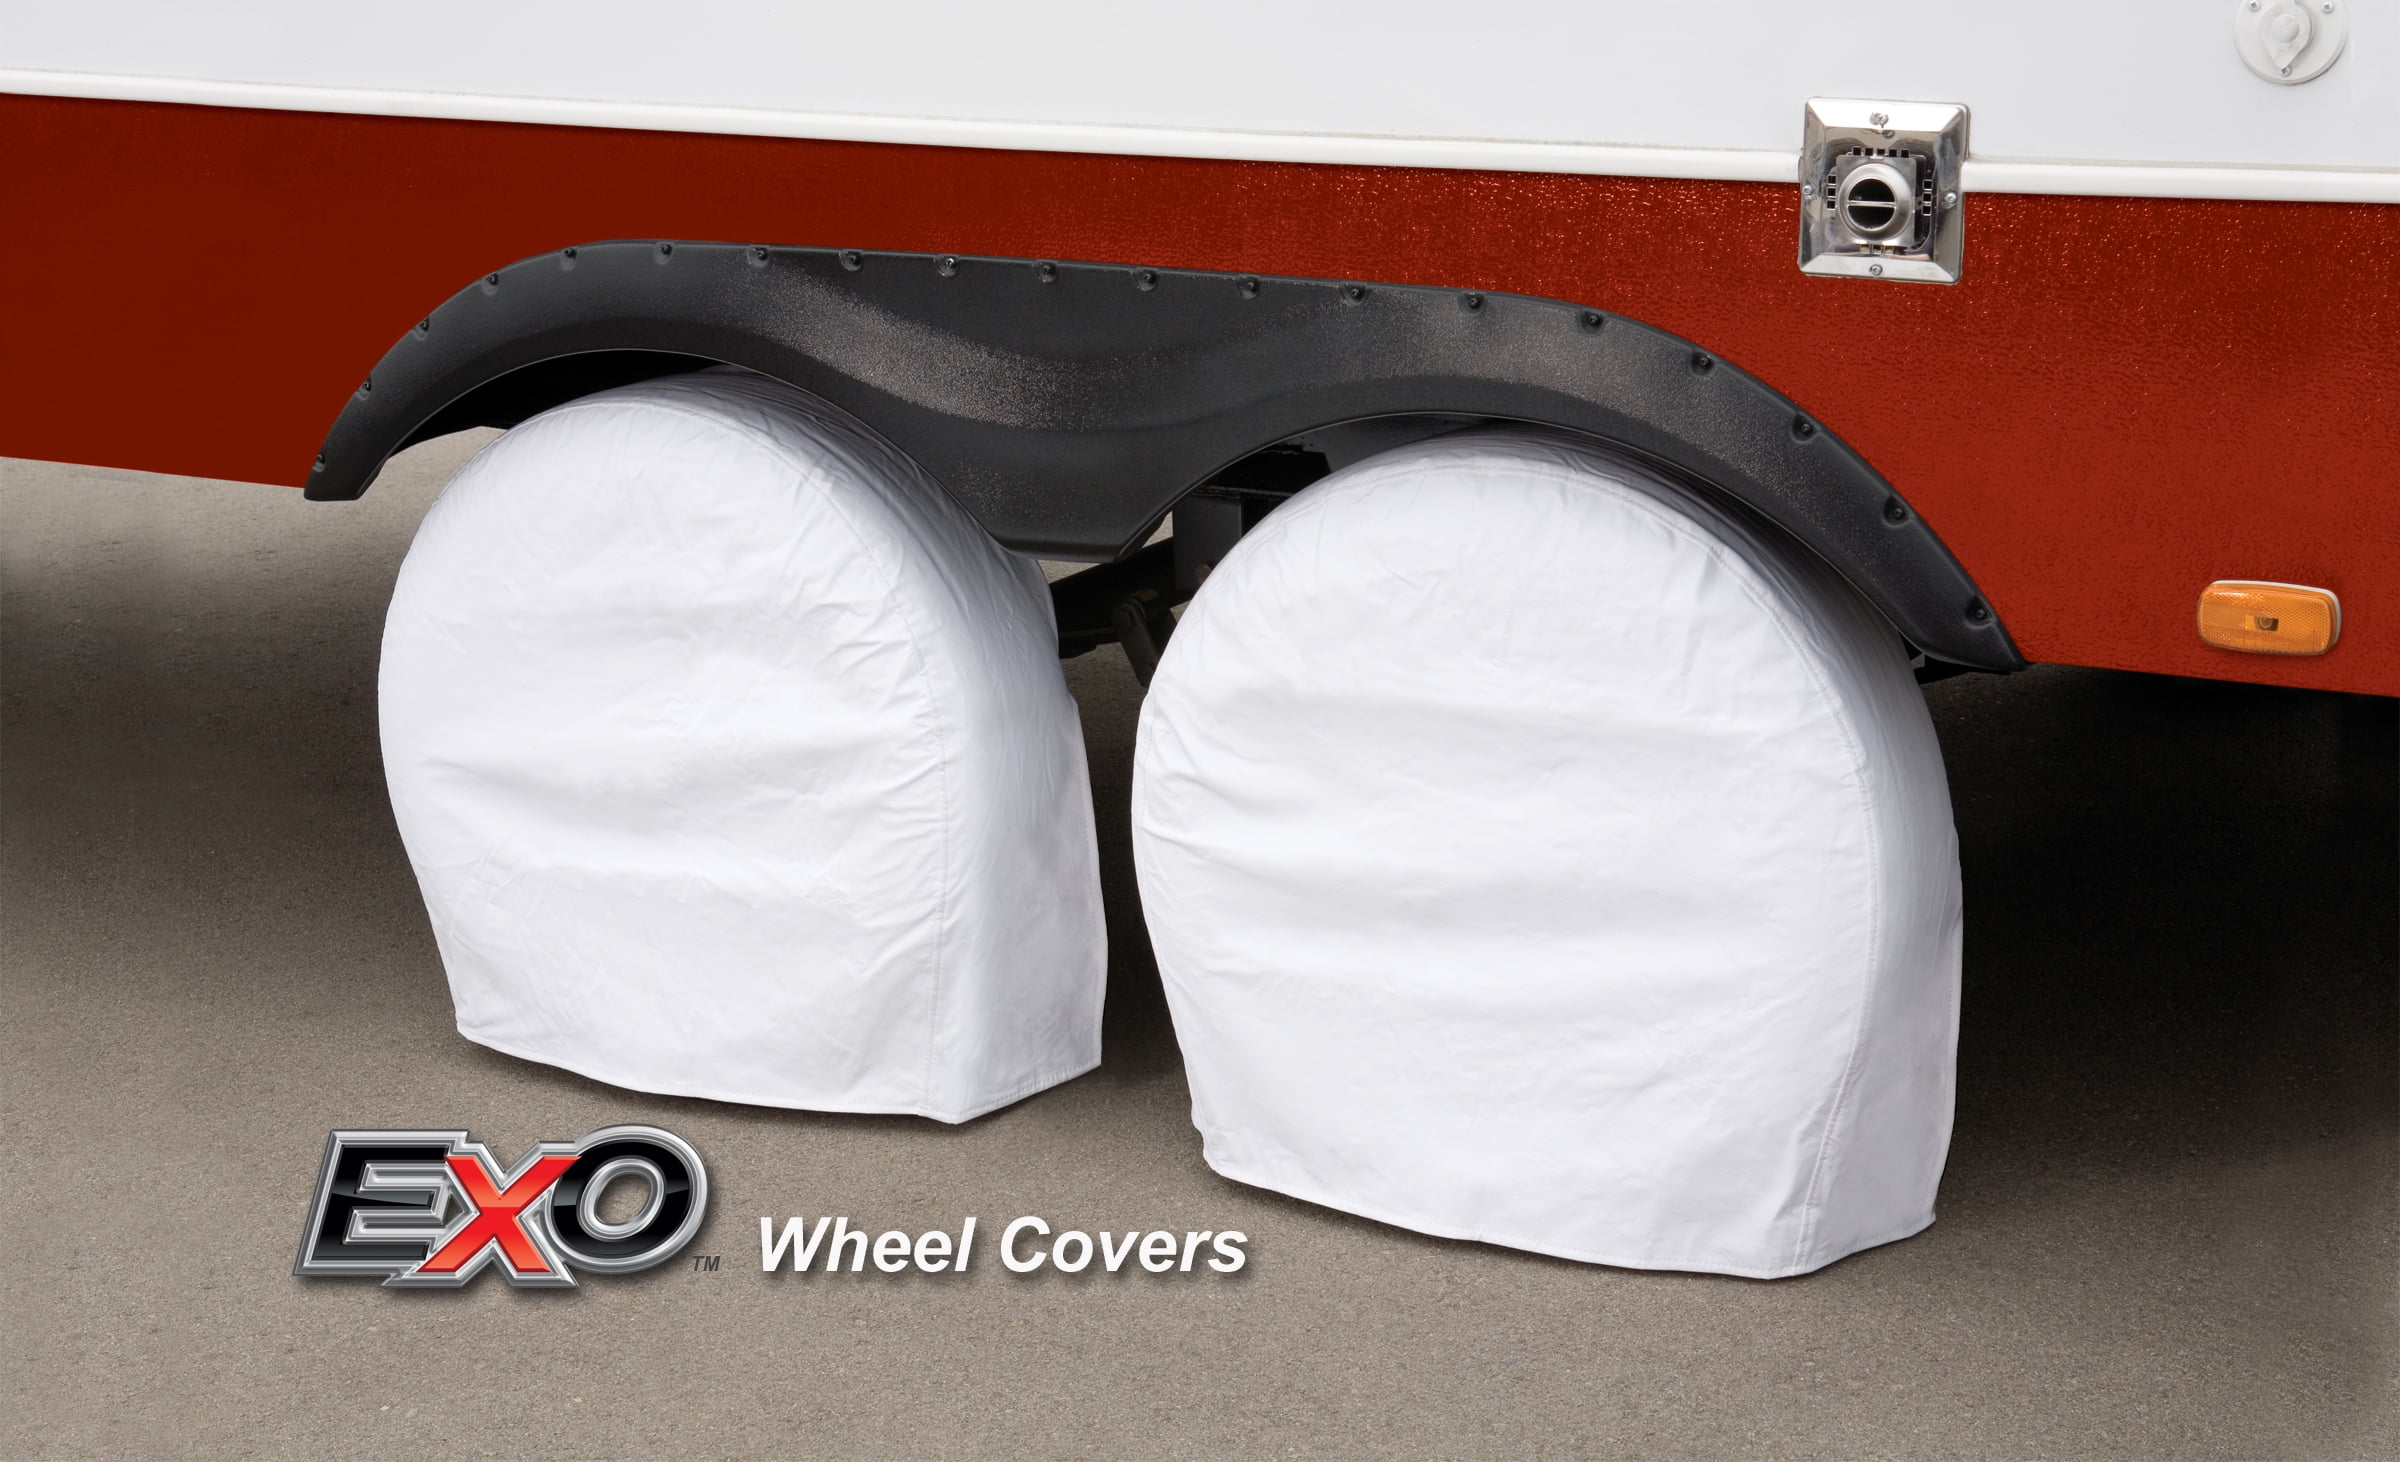 Expedition 24-26 RV Wheel Cover Set of